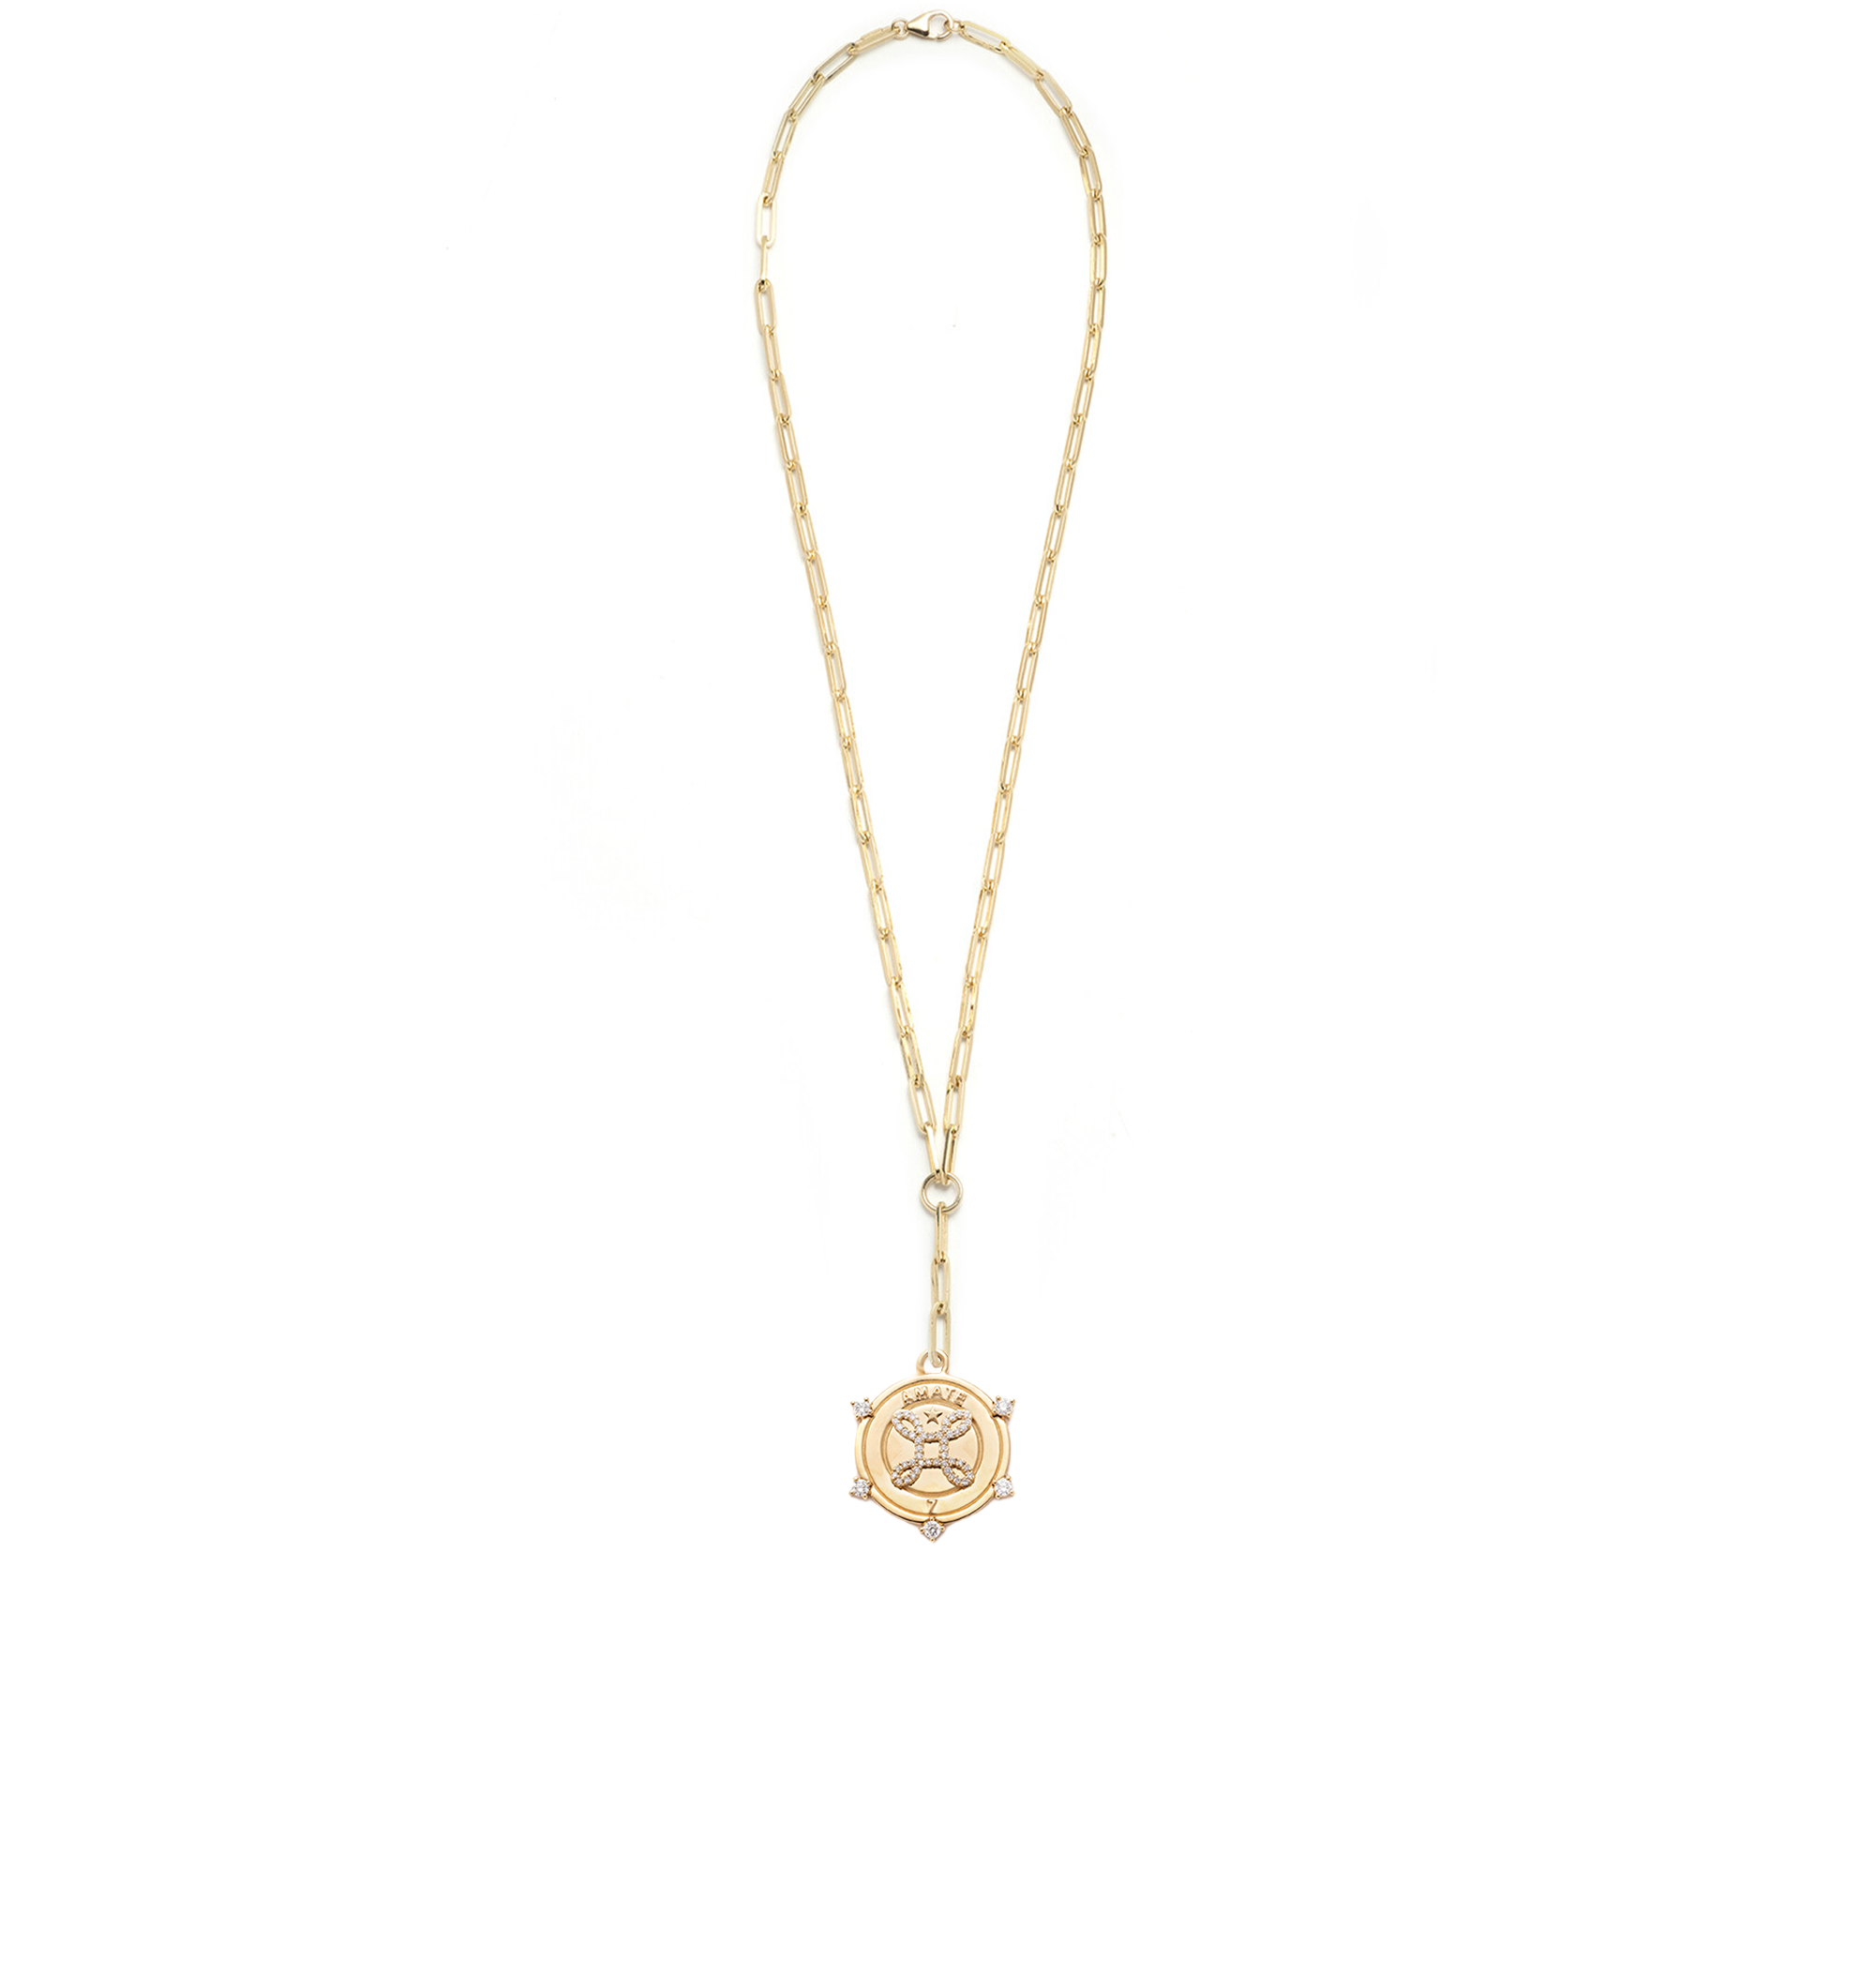 Amate - True Love : Classic Fob Clip Extension Chain Necklace